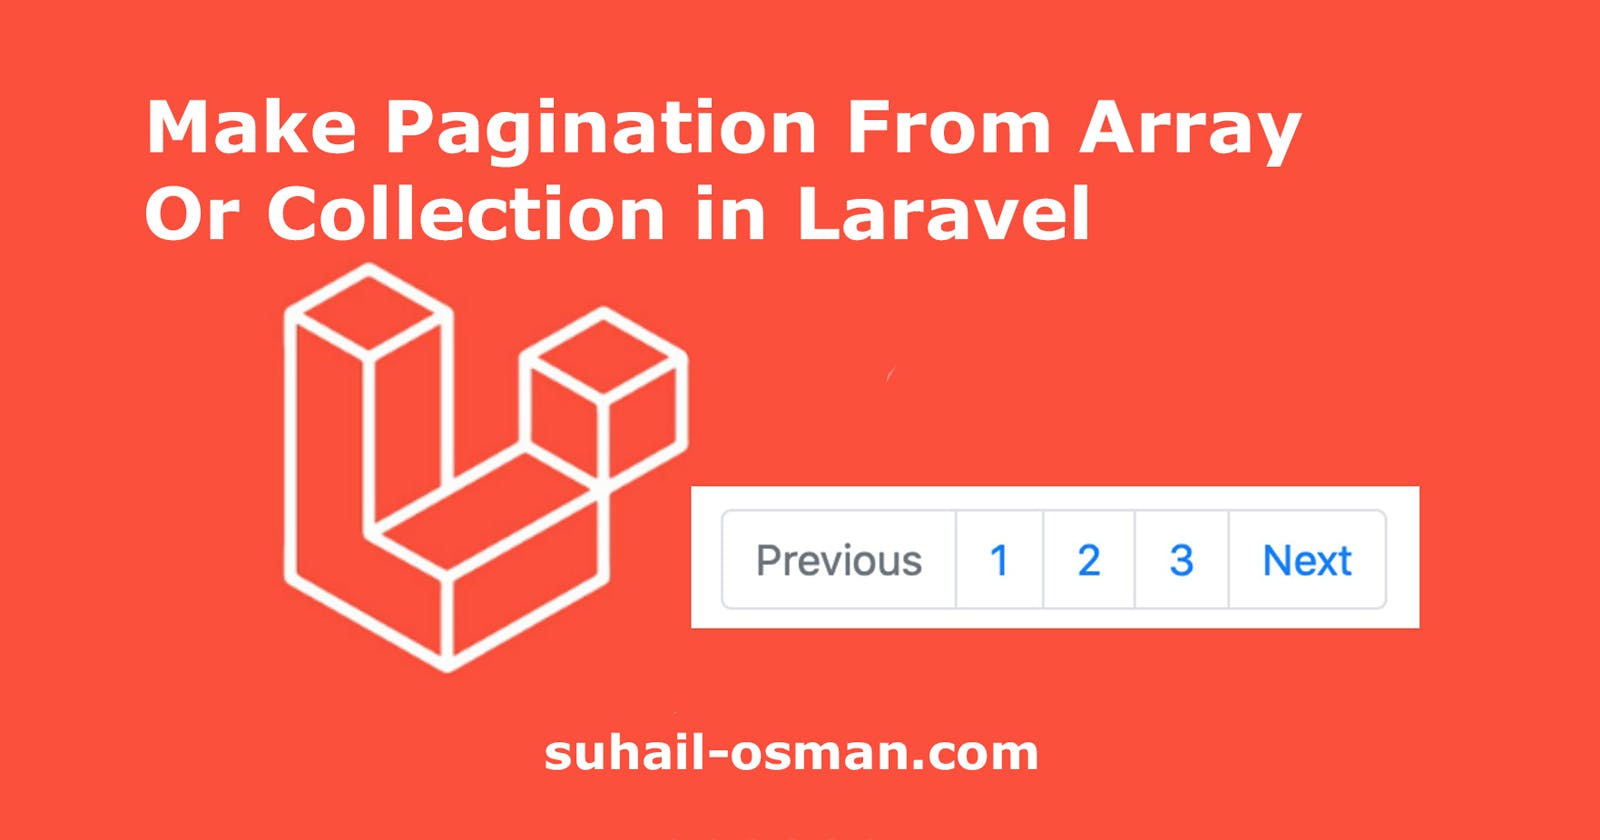 Make Pagination From Array Or Collection in Laravel